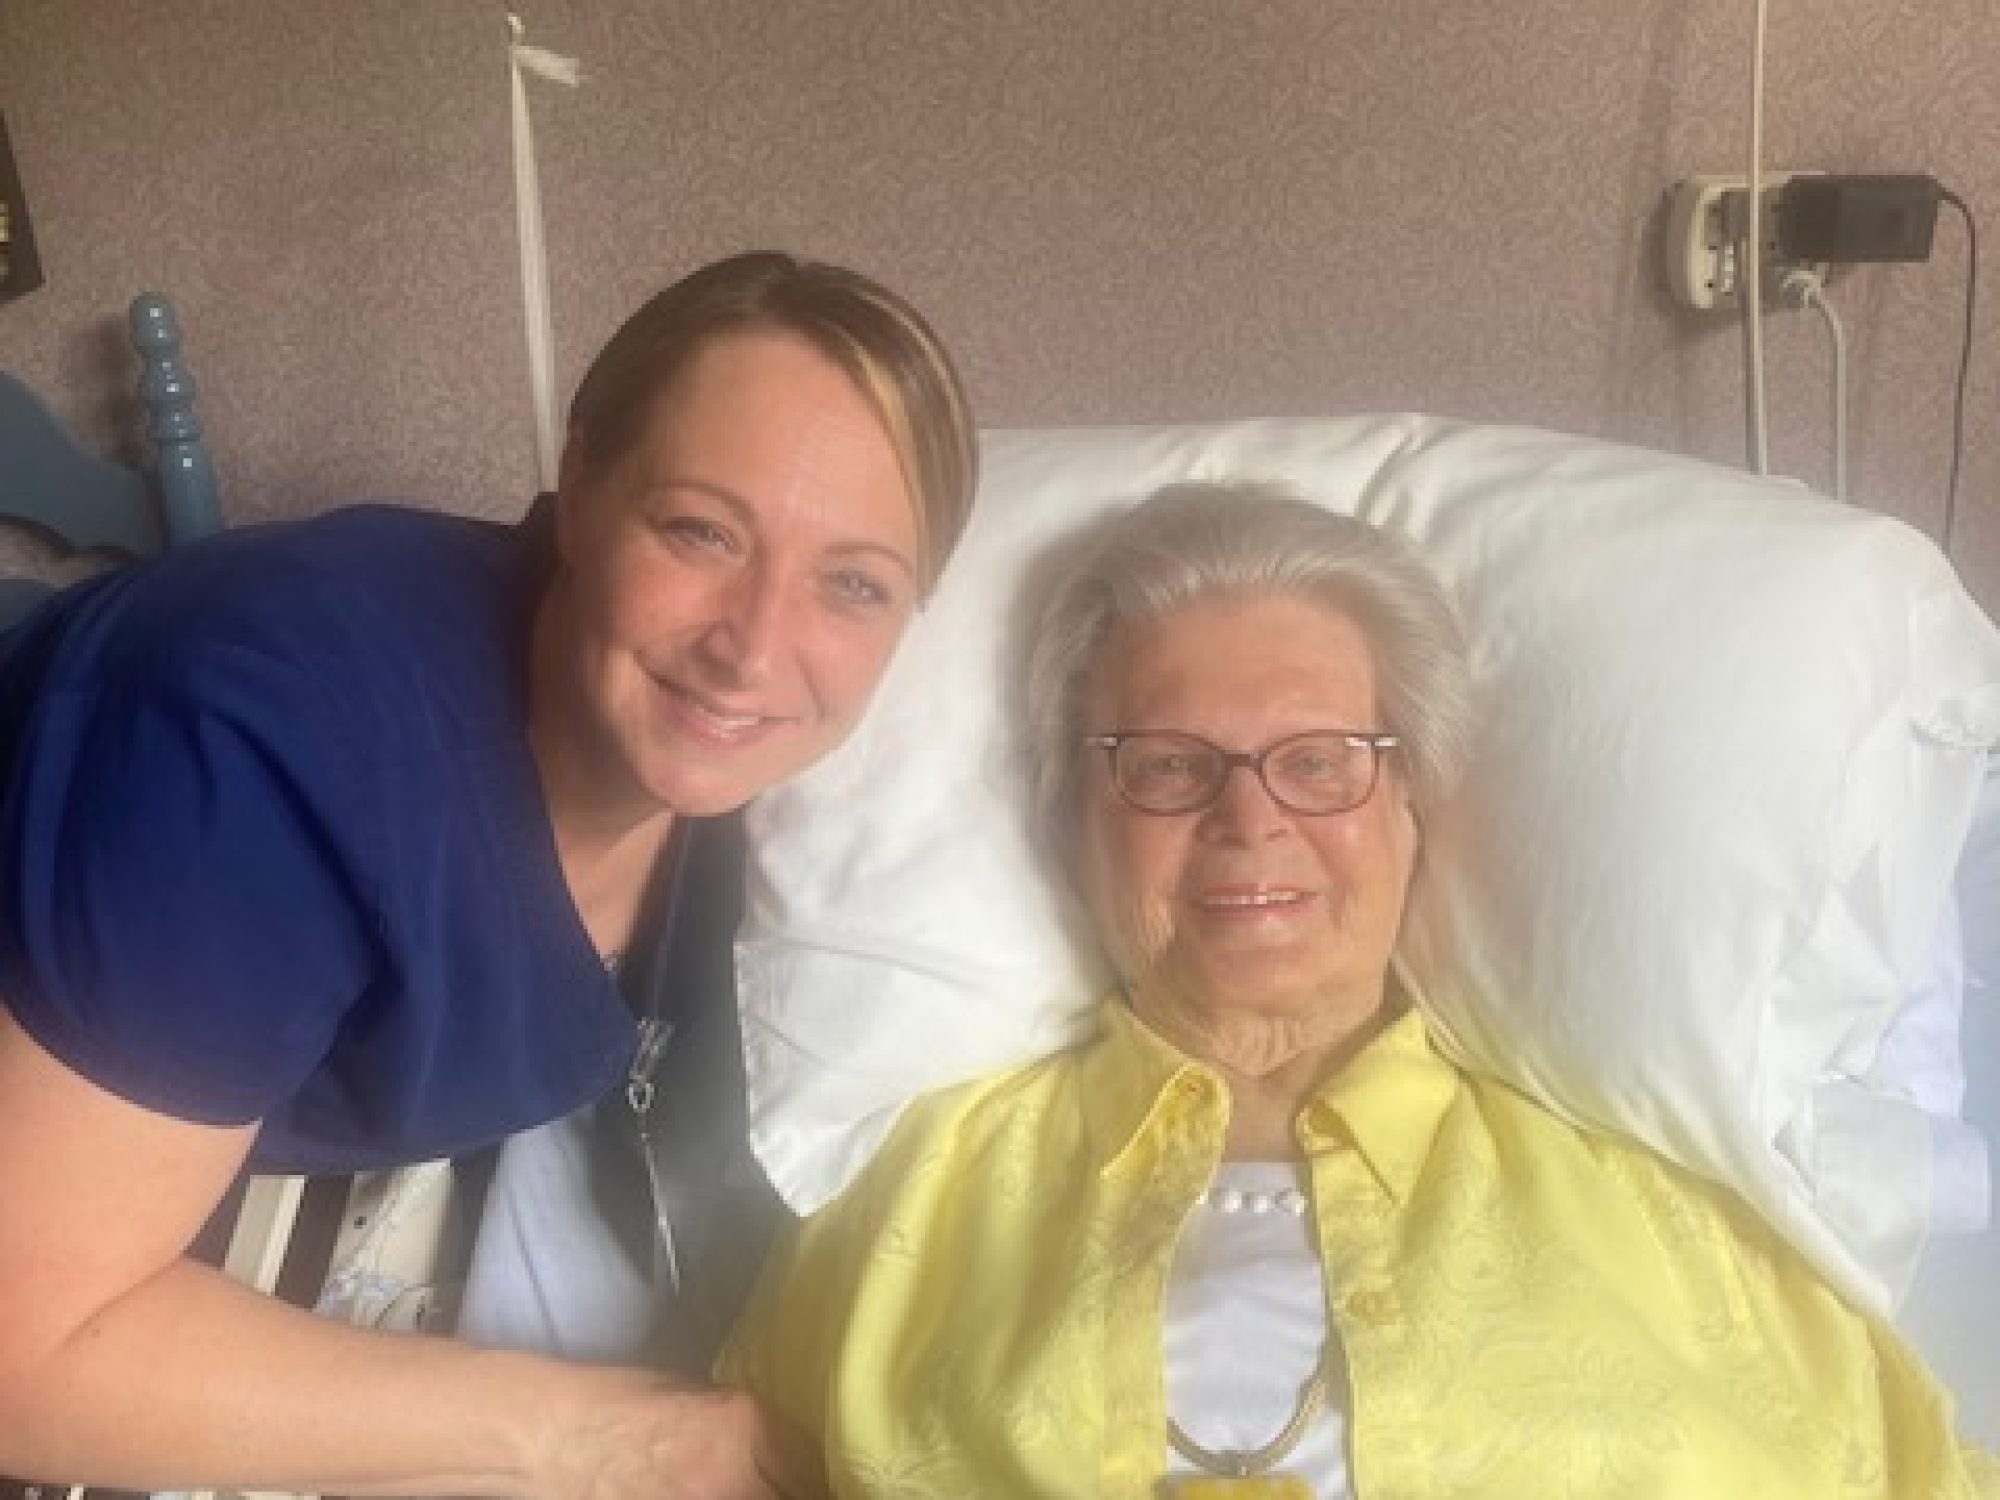 Jessica Brown, CNA and TNA Preceptor shares a moment with resident Jeanne McGrath